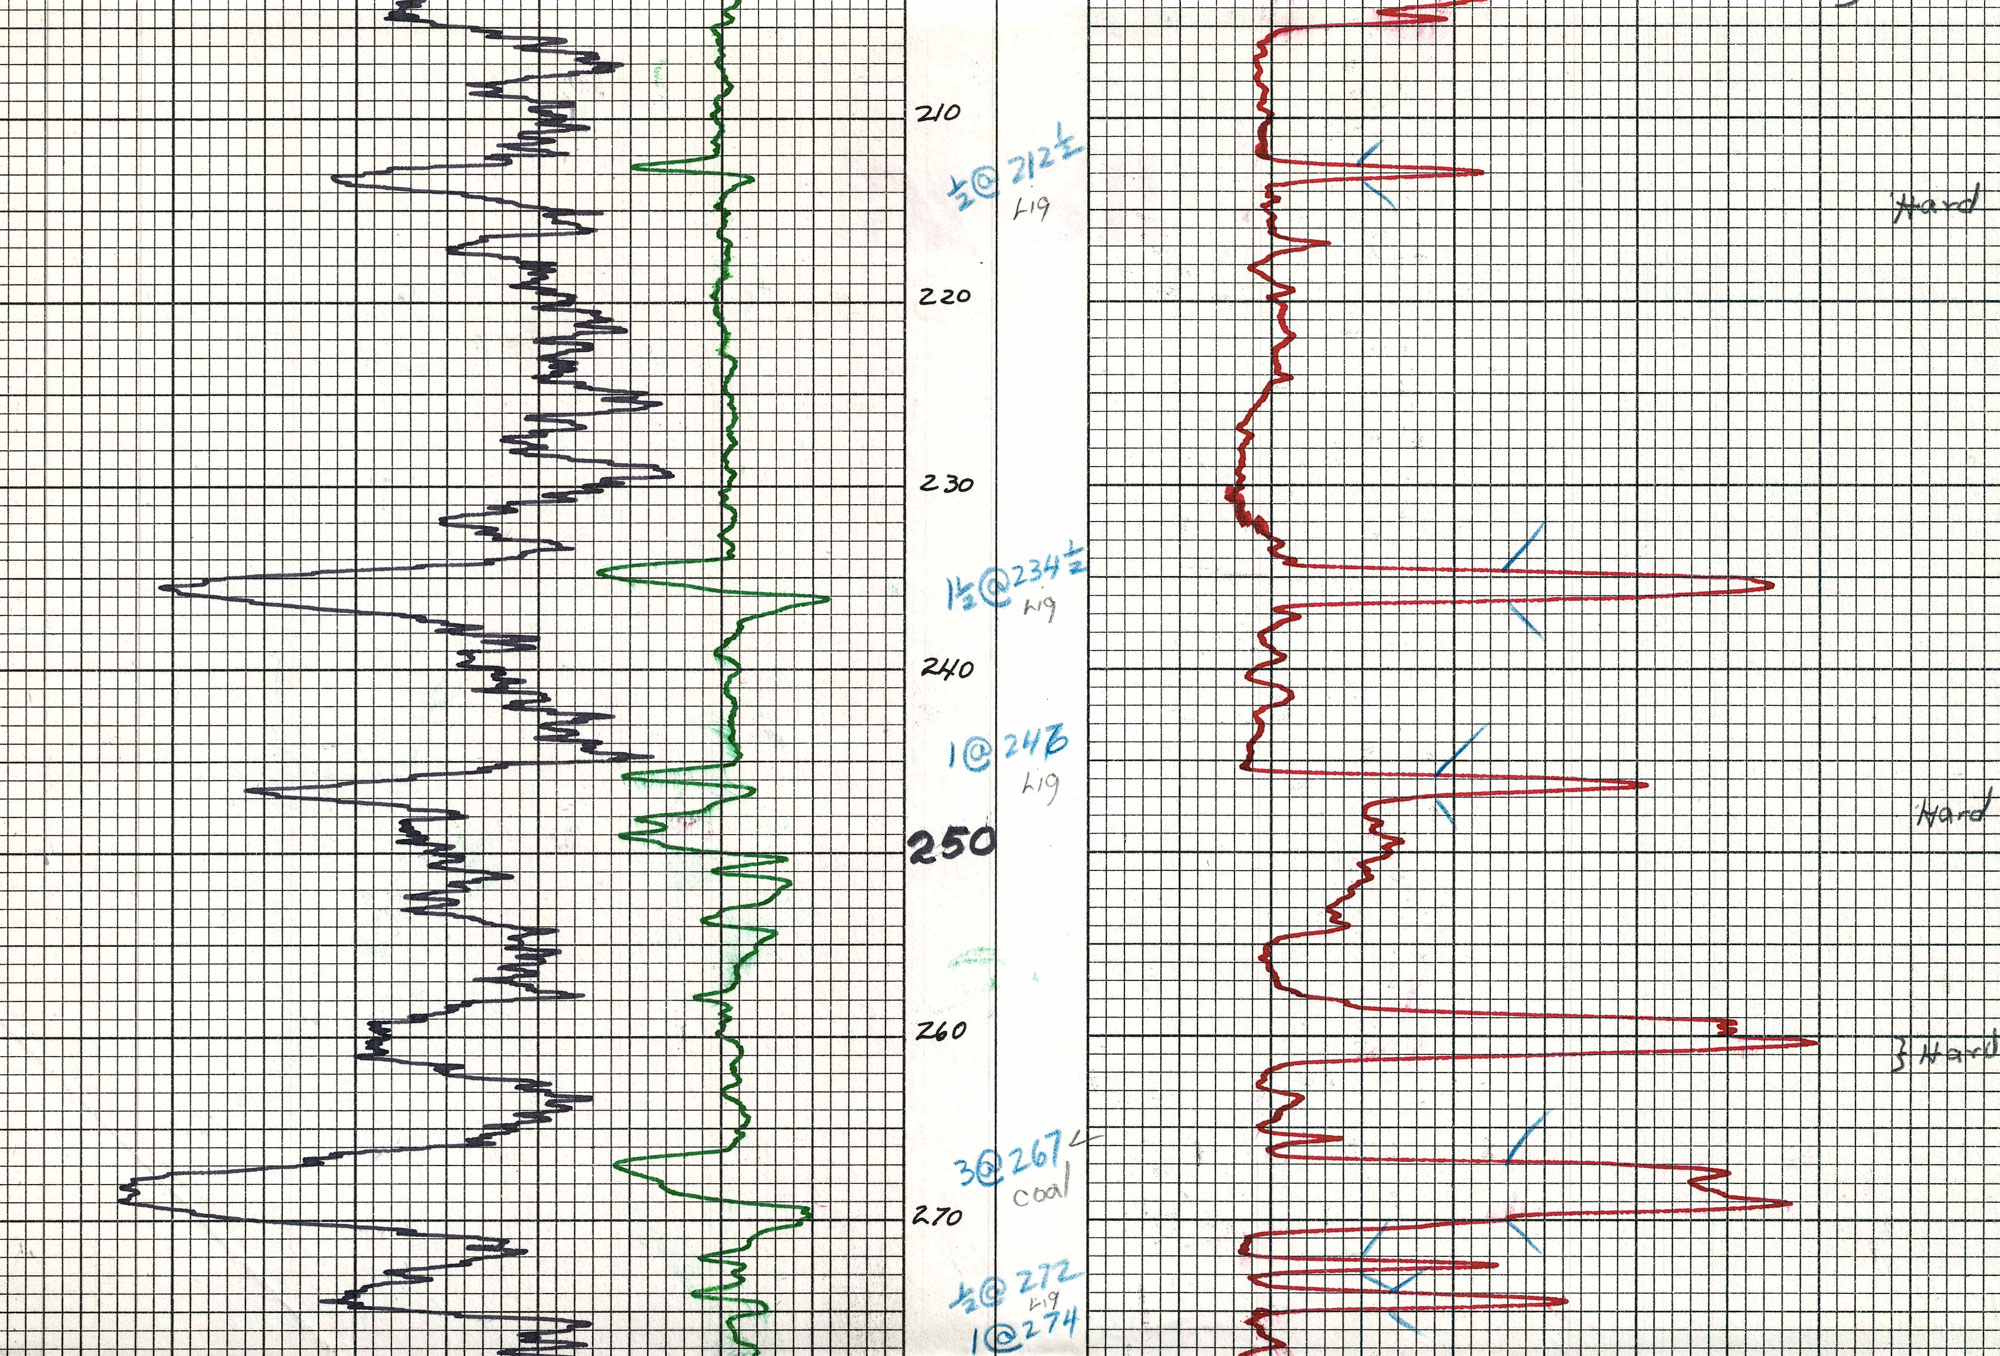 Detail from one of over 600 Denver Basin geophysical and lithological logs included in the ON-OF-78-08M digitization project. Photo credit: Colorado Geological Survey.